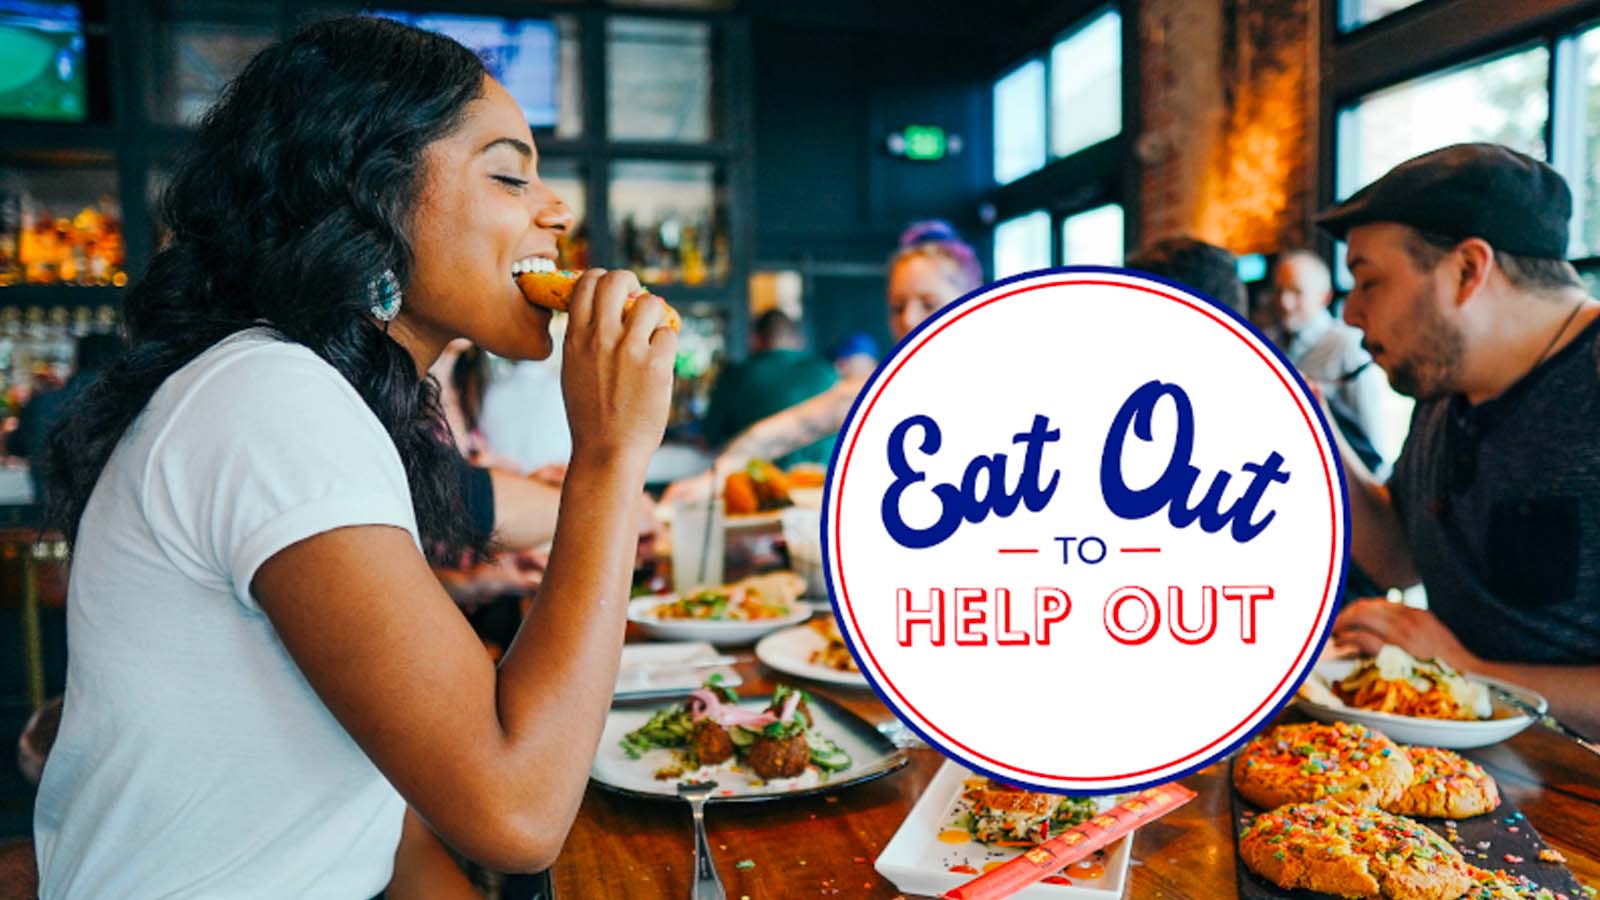 Eagle Eye helps Hospitality POS users ensure access to the government's 'Eat Out to Help Out' scheme